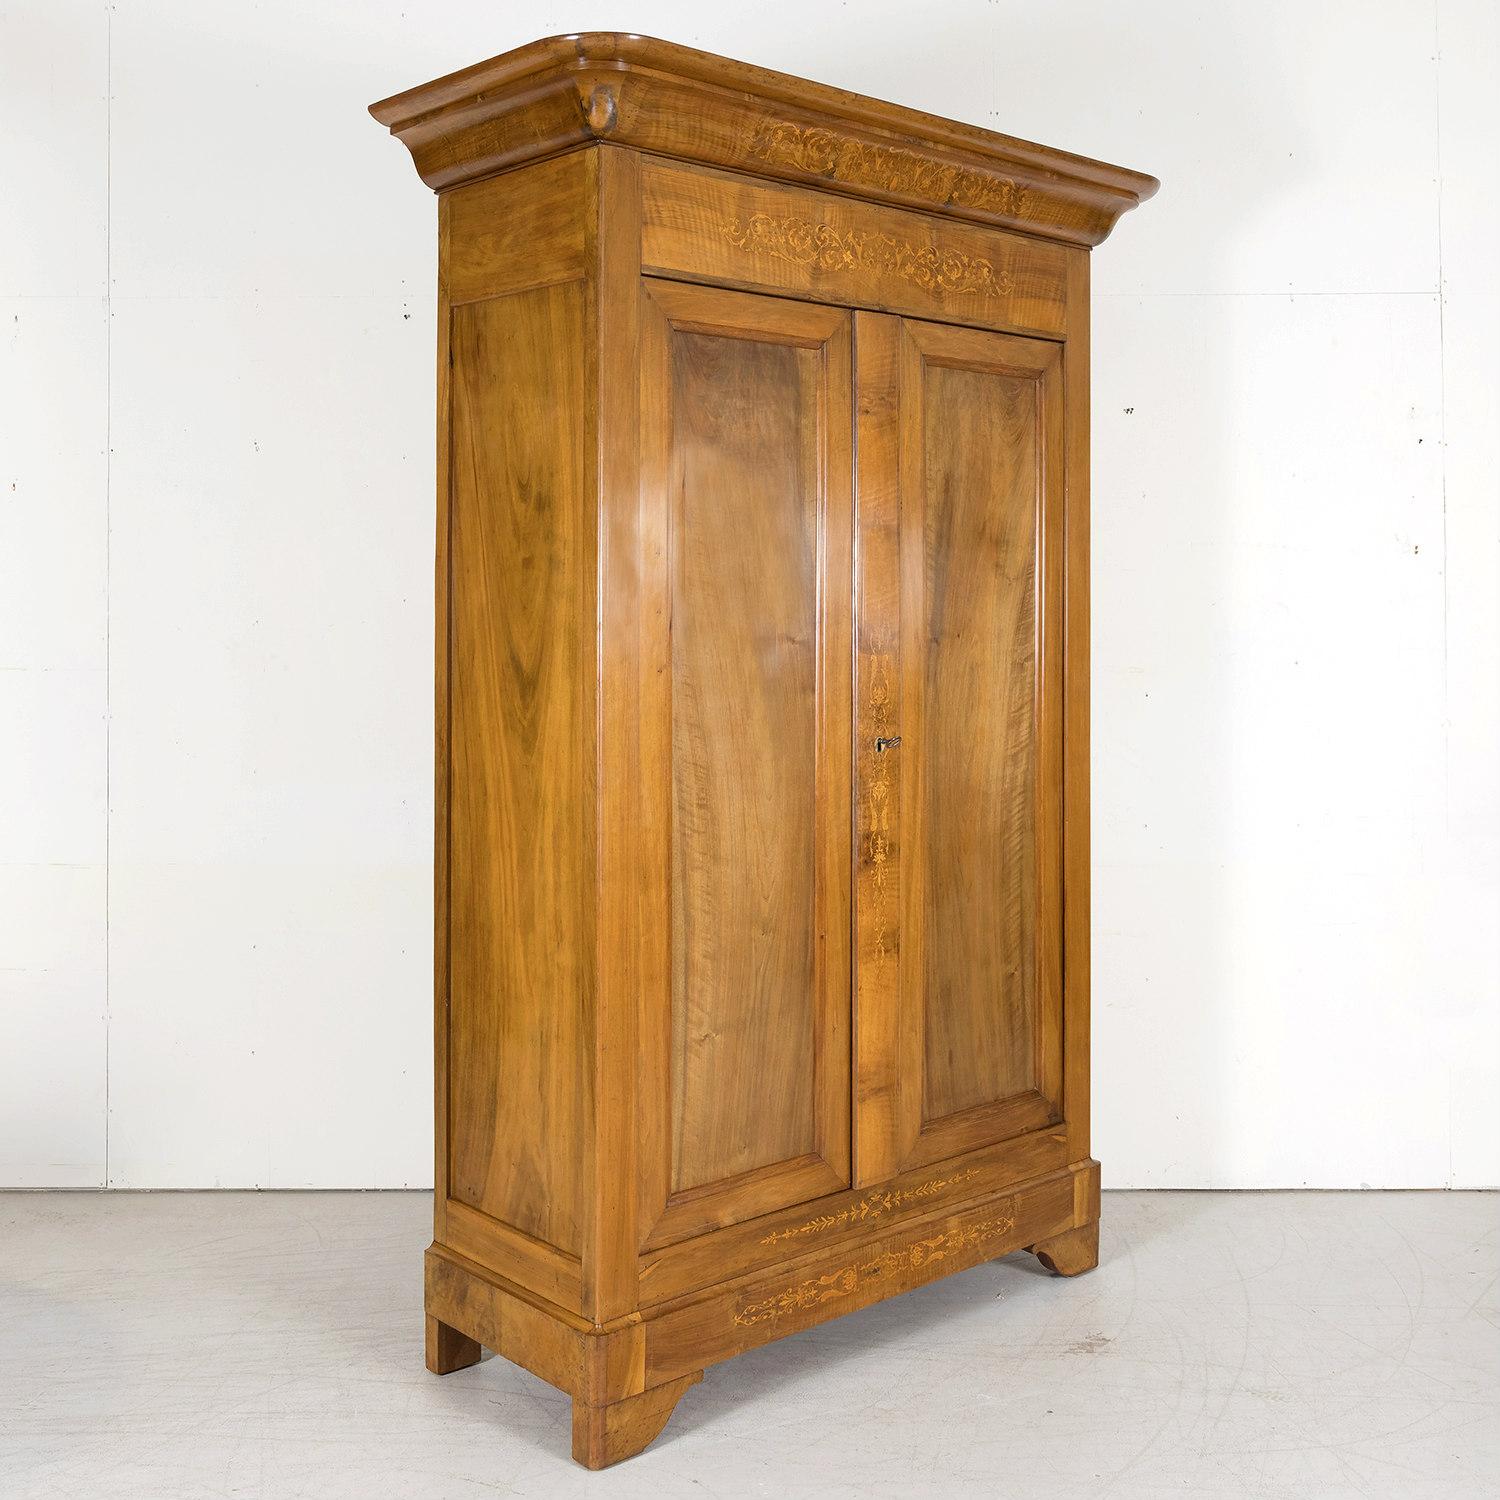 An impressive French Restauration period armoire, circa 1825, handcrafted of solid walnut accented with rich fruitwood marquetry inlay by talented artisans in Lyon, the capital city in France’s Auvergne-Rhône-Alpes region, world renowned for its